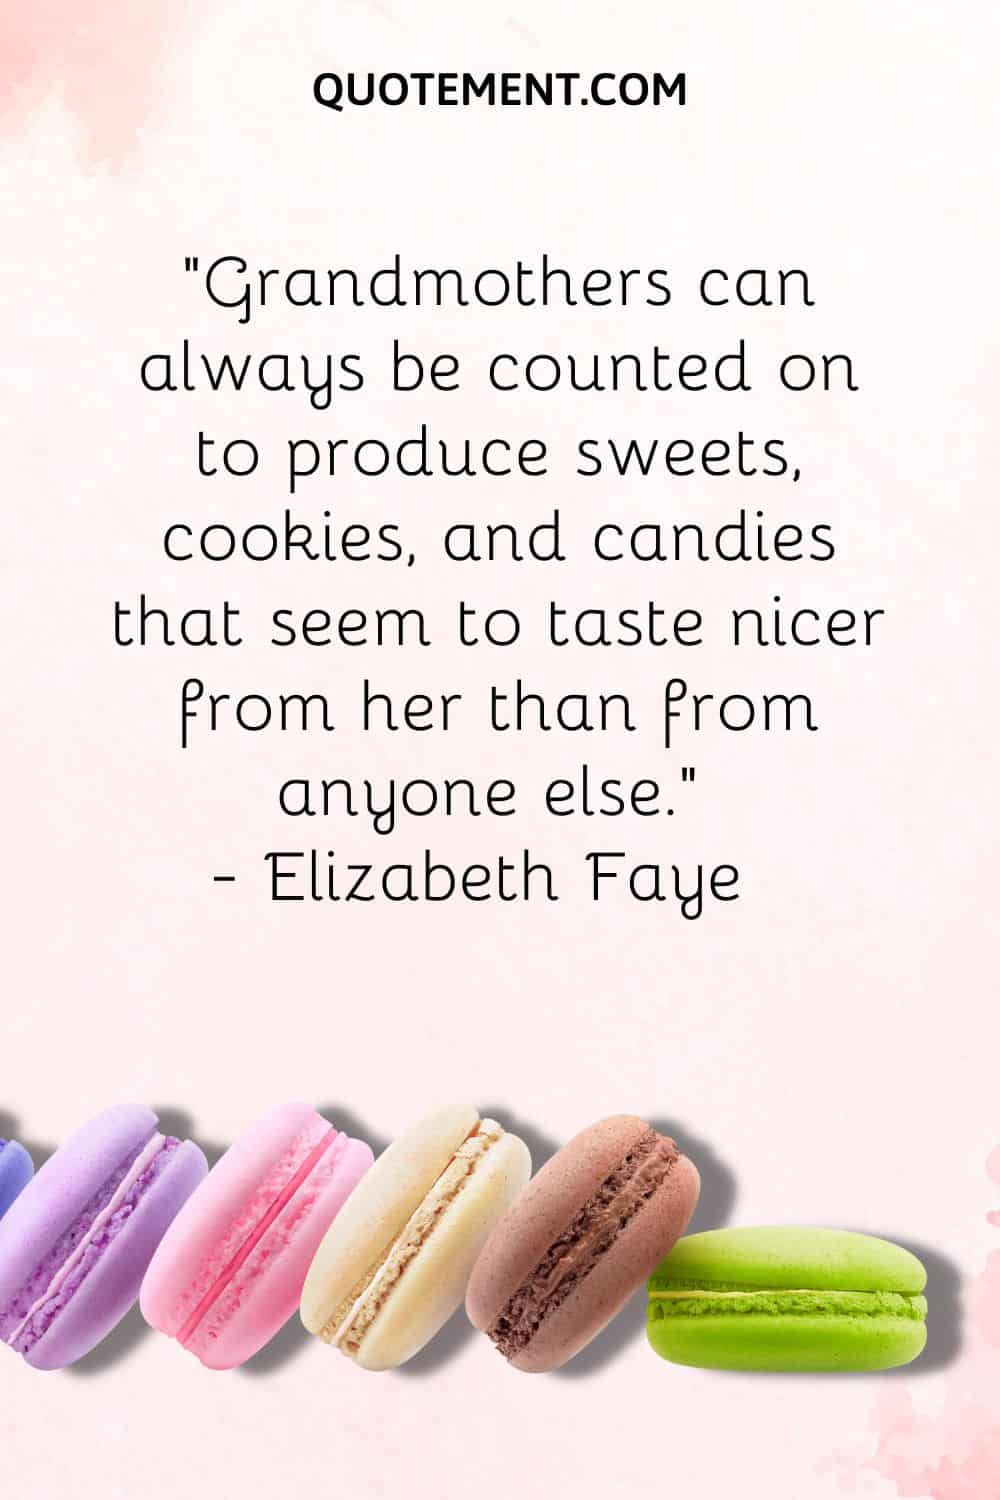 Grandmothers can always be counted on to produce sweets